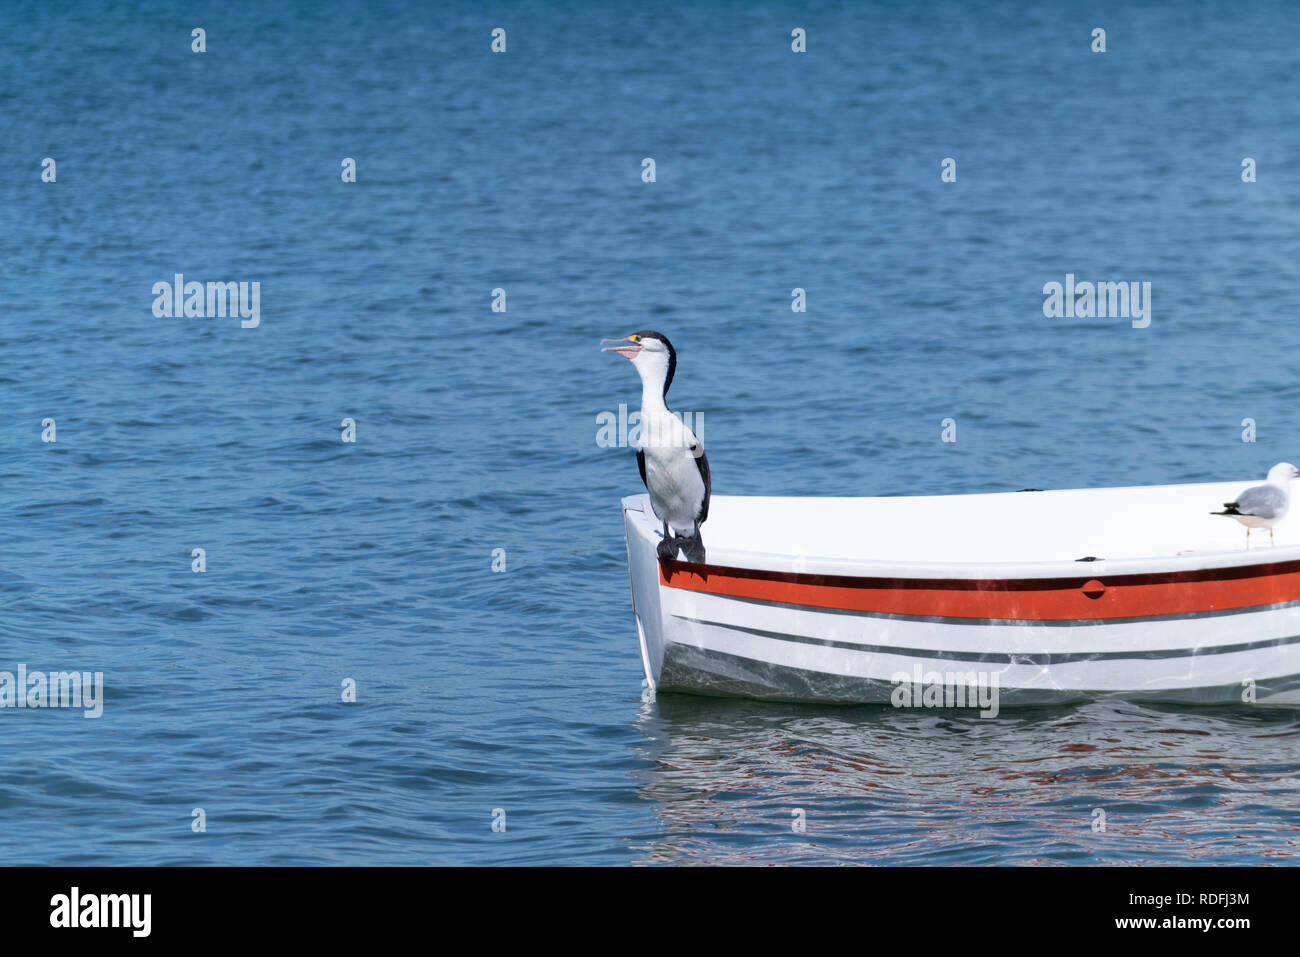 Australian pied cormorant standing on stern of small white dinghy Stock Photo